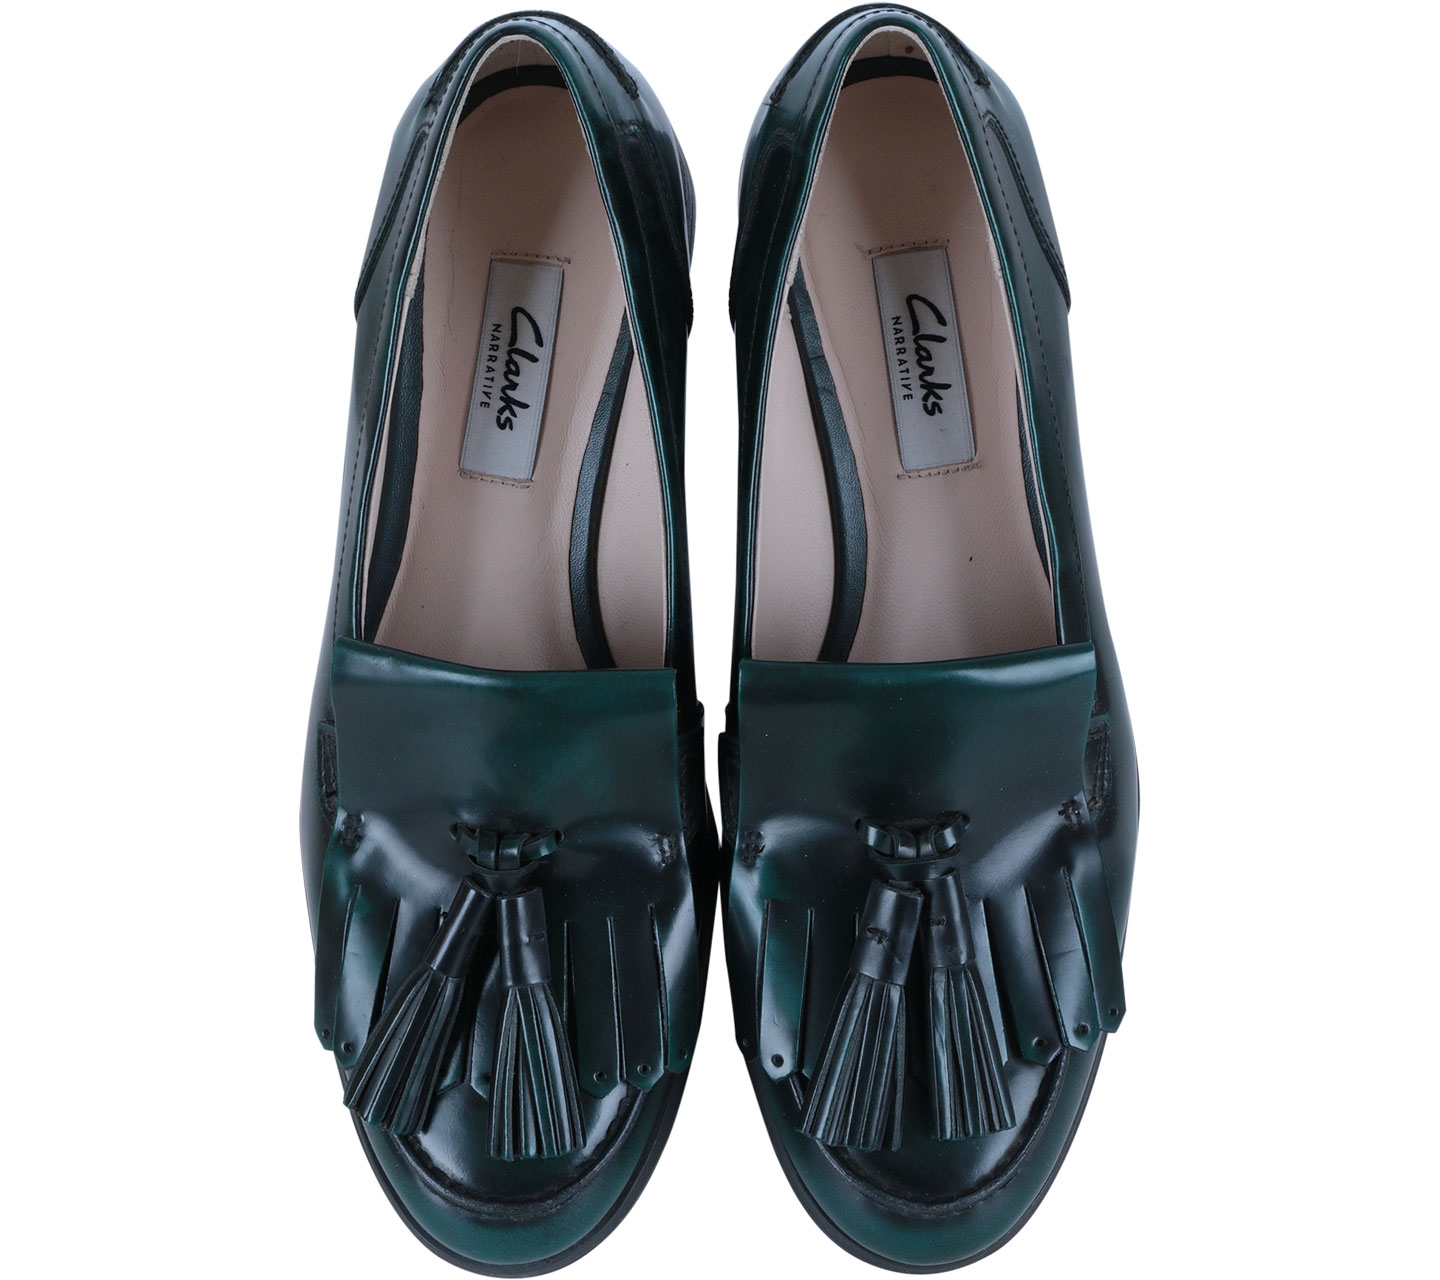 Clarks Green Moccasin Flats